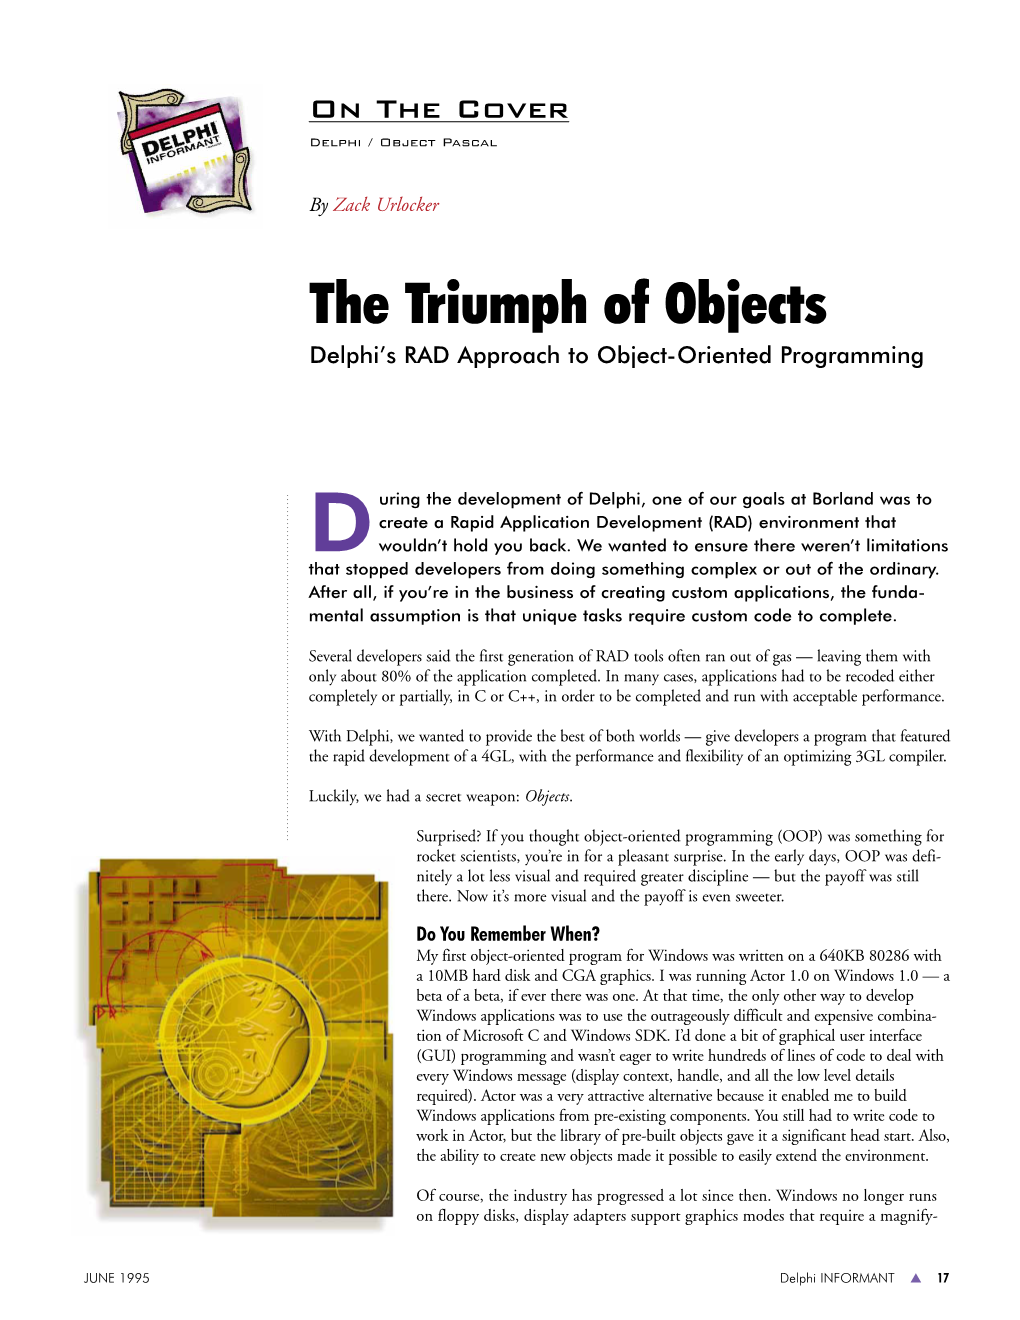 The Triumph of Objects Delphi’S RAD Approach to Object-Oriented Programming